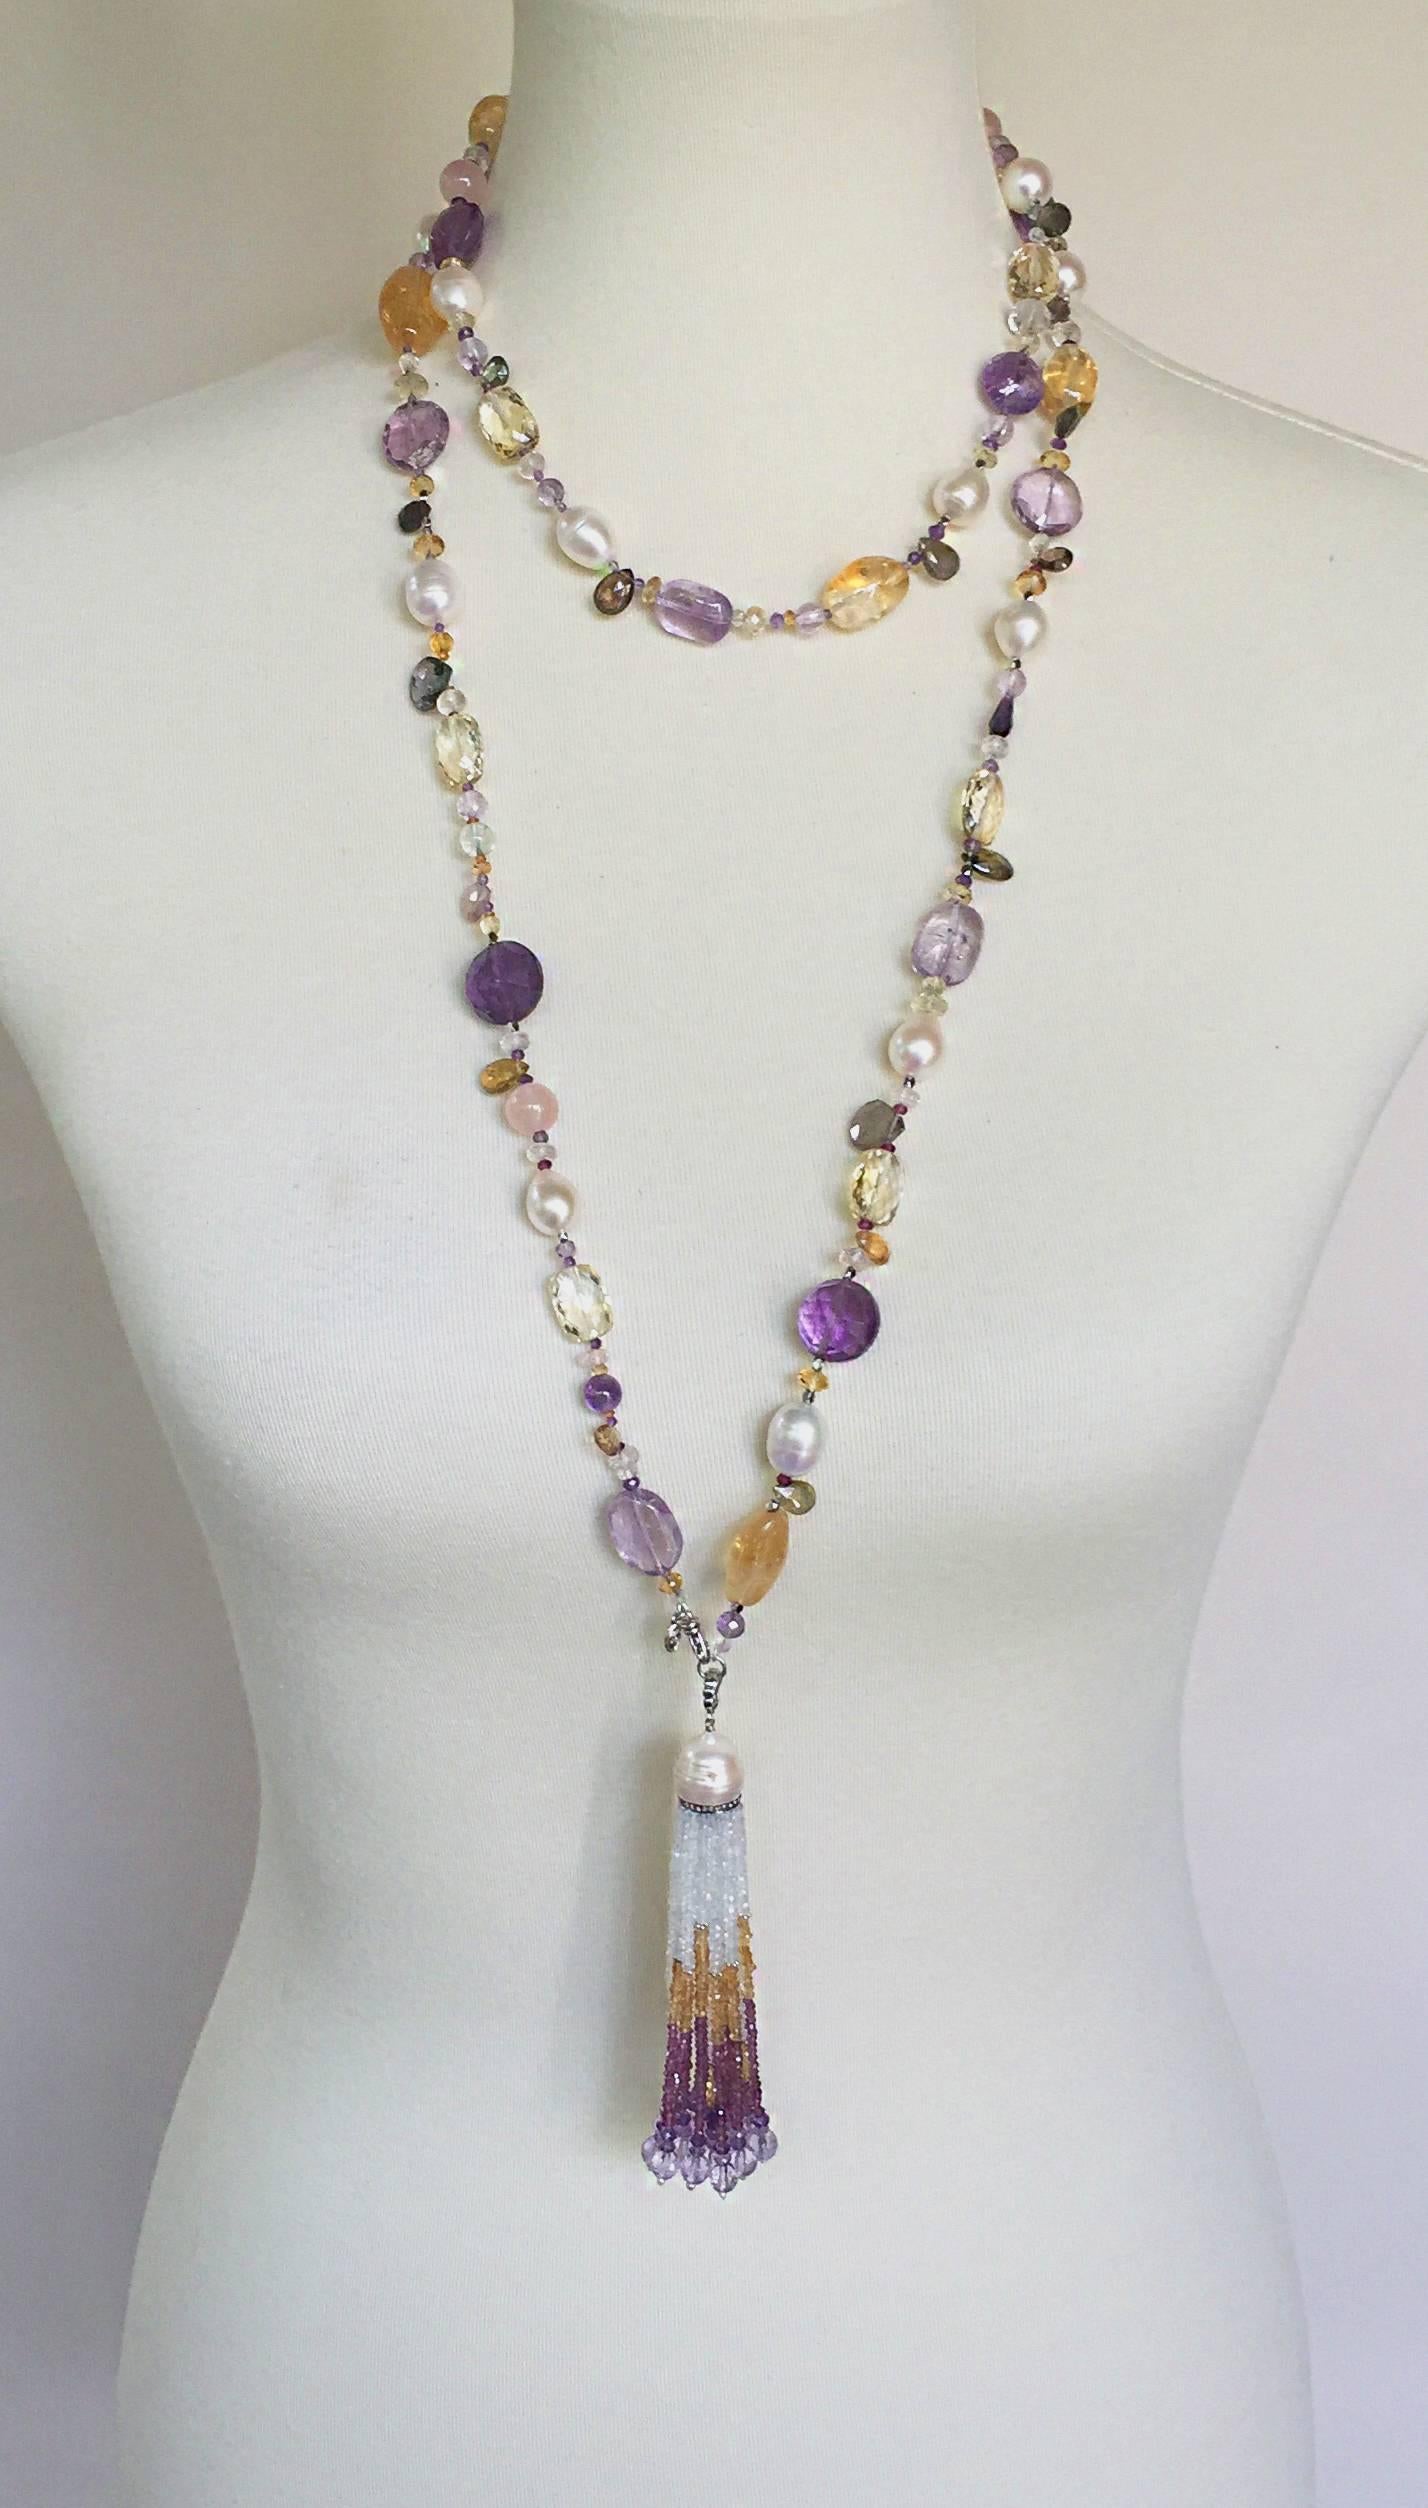 This extra long sautoir has a variety of wearable options as seen in photos. The light and elegant tone is highlighted by the shimmering colors of the amethyst, citrine, garnet, tourmaline, aquamarine, and topaz beads.  Tear drop stones are woven